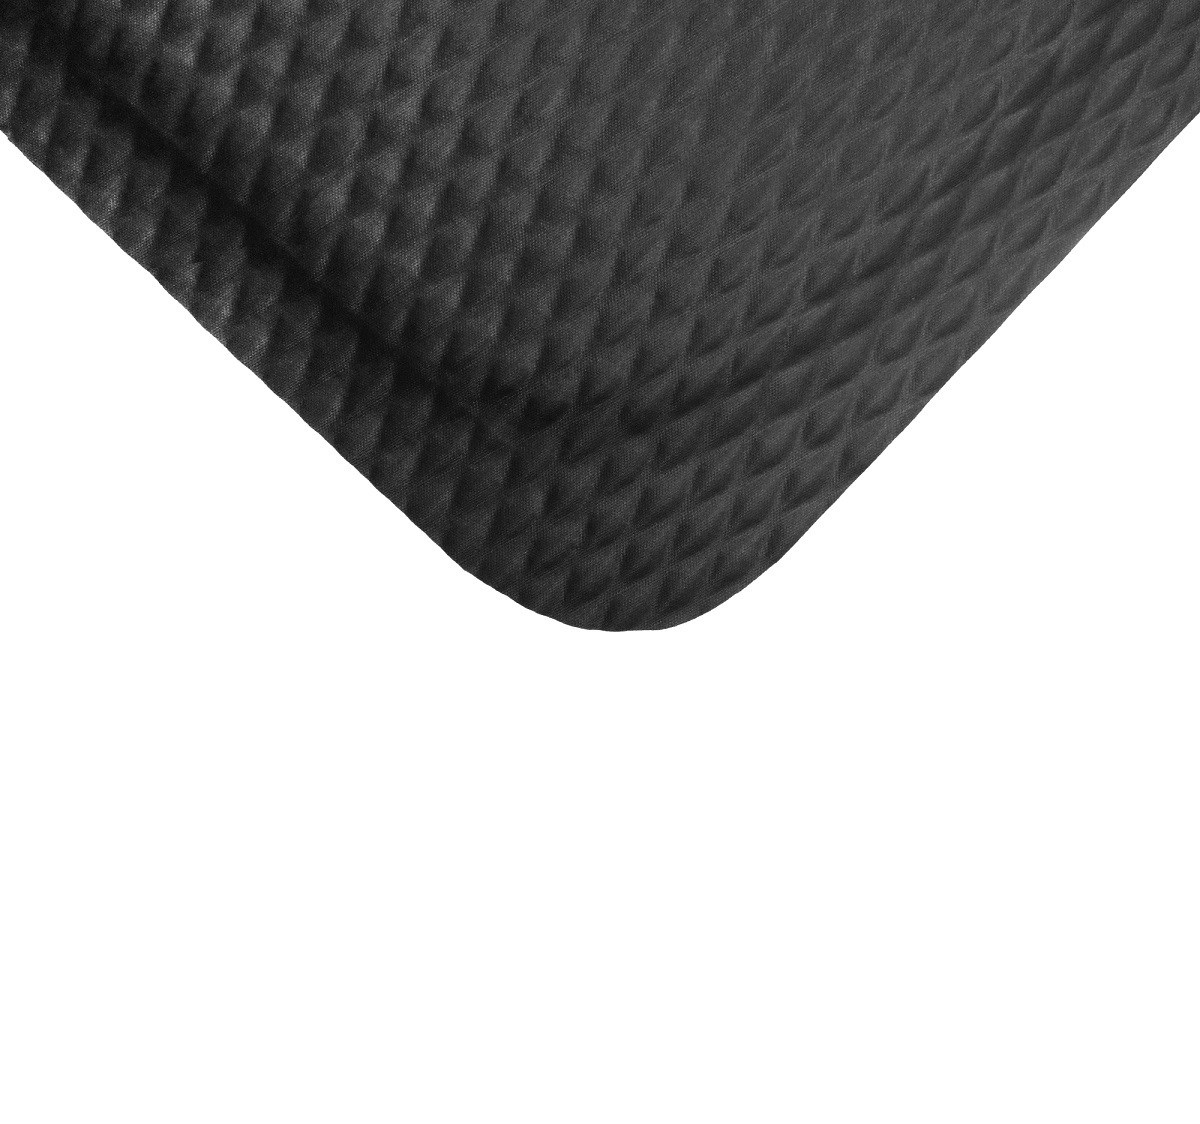 Happy Feet Anti-Fatigue Mats with Striped Borders